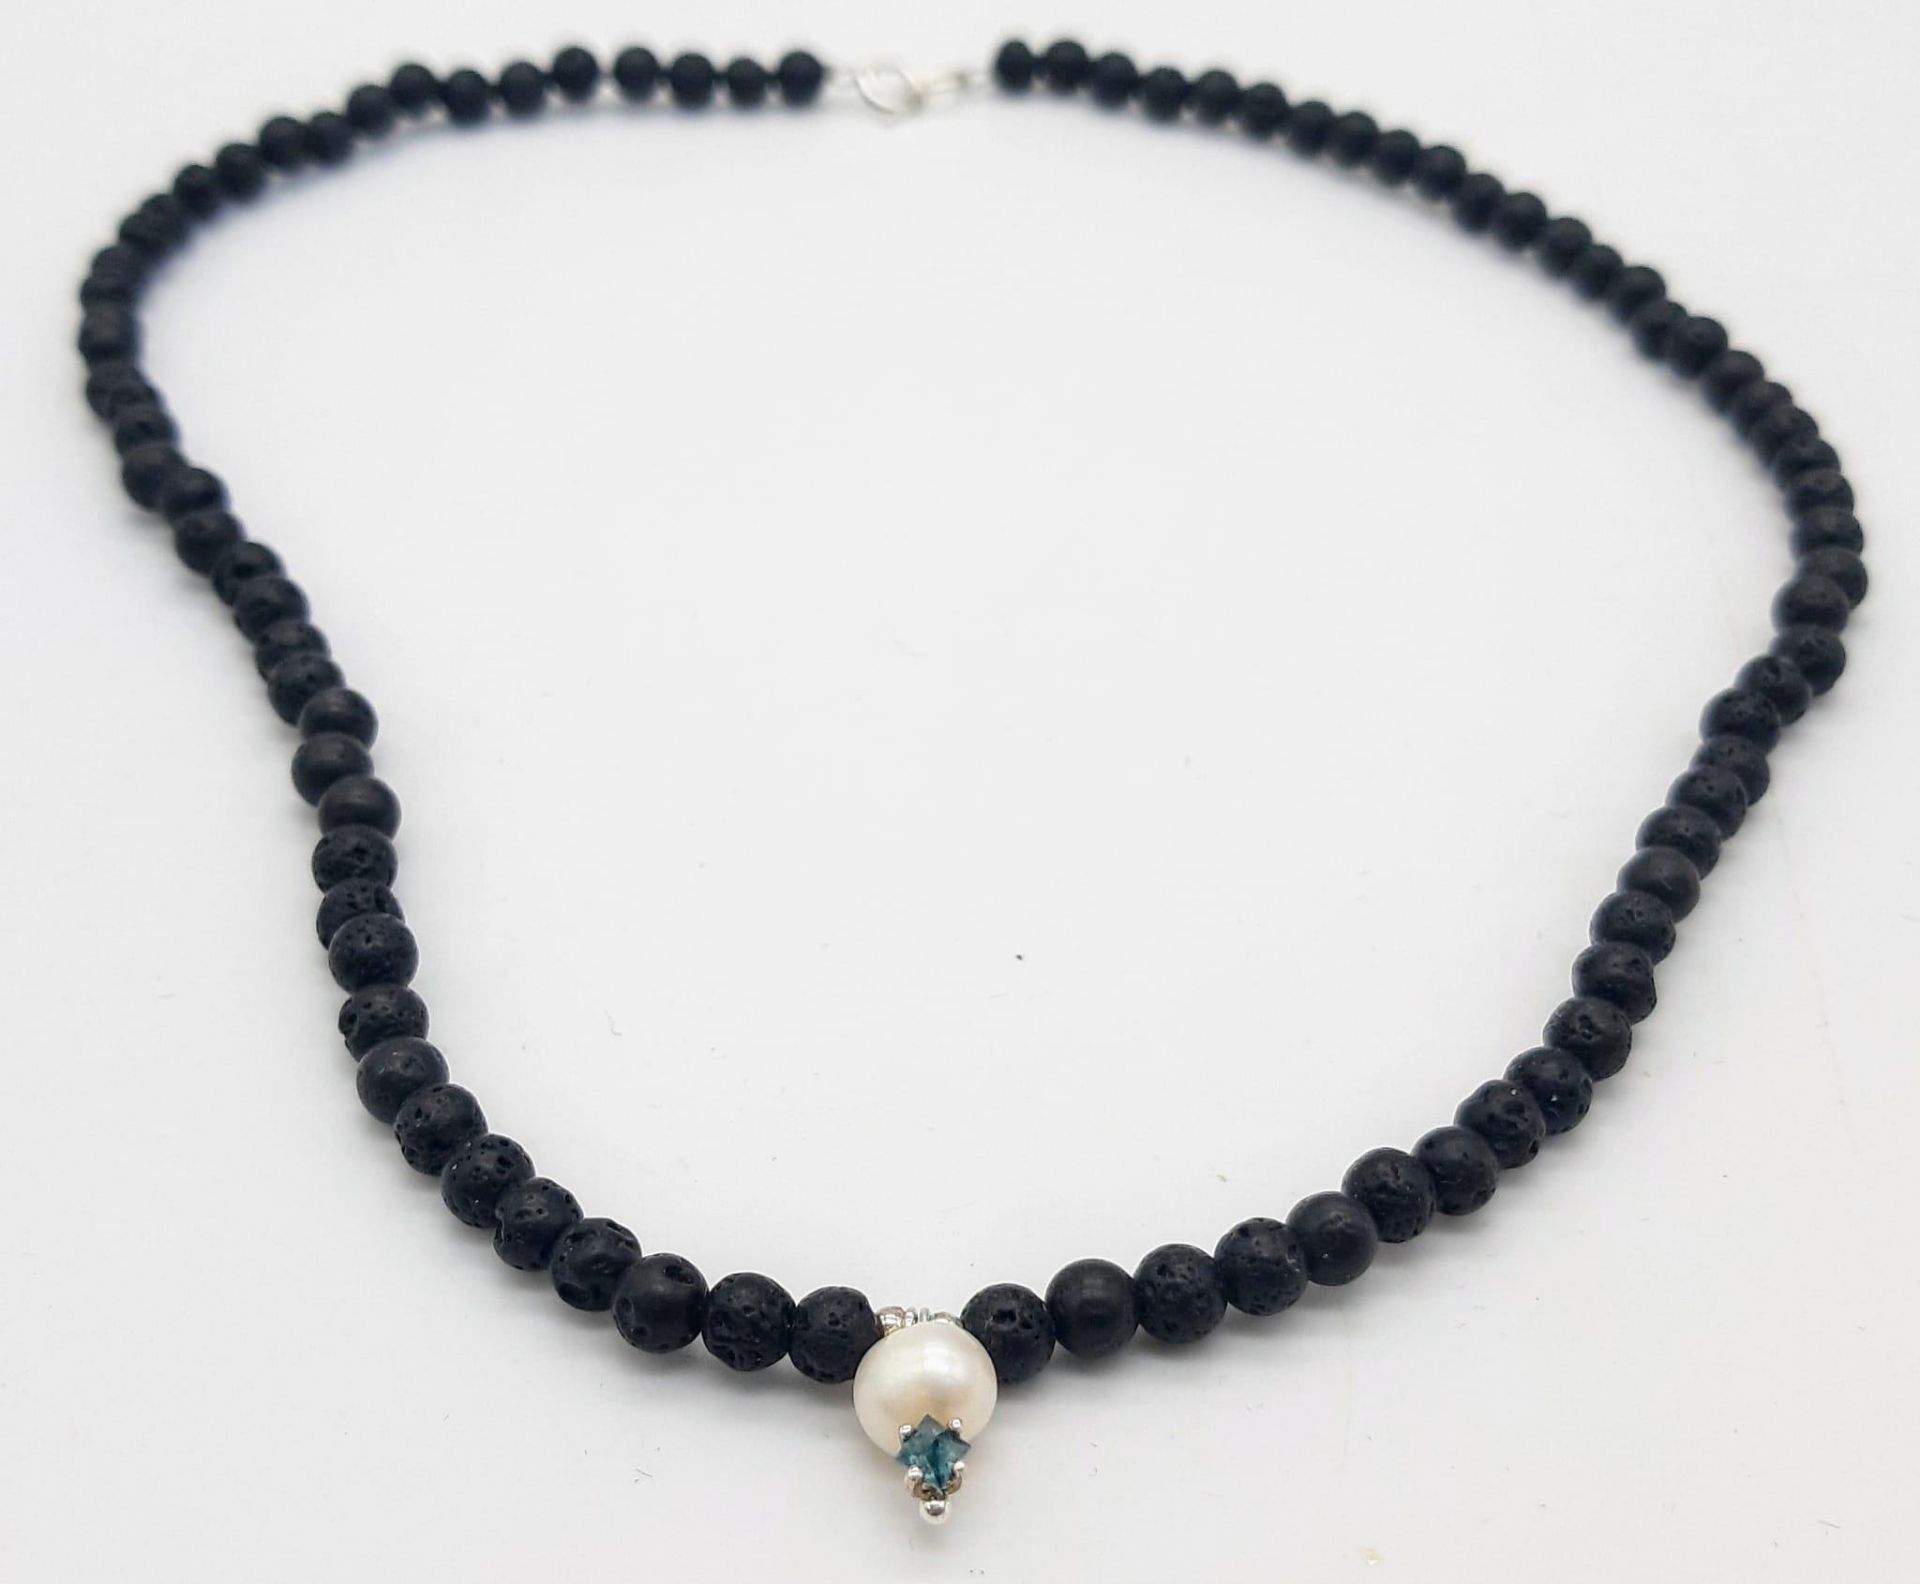 A Lava Volcanic Bead Necklace with Pearl and 0.10 Blue Diamond Pendant. 40cm. - Image 2 of 5